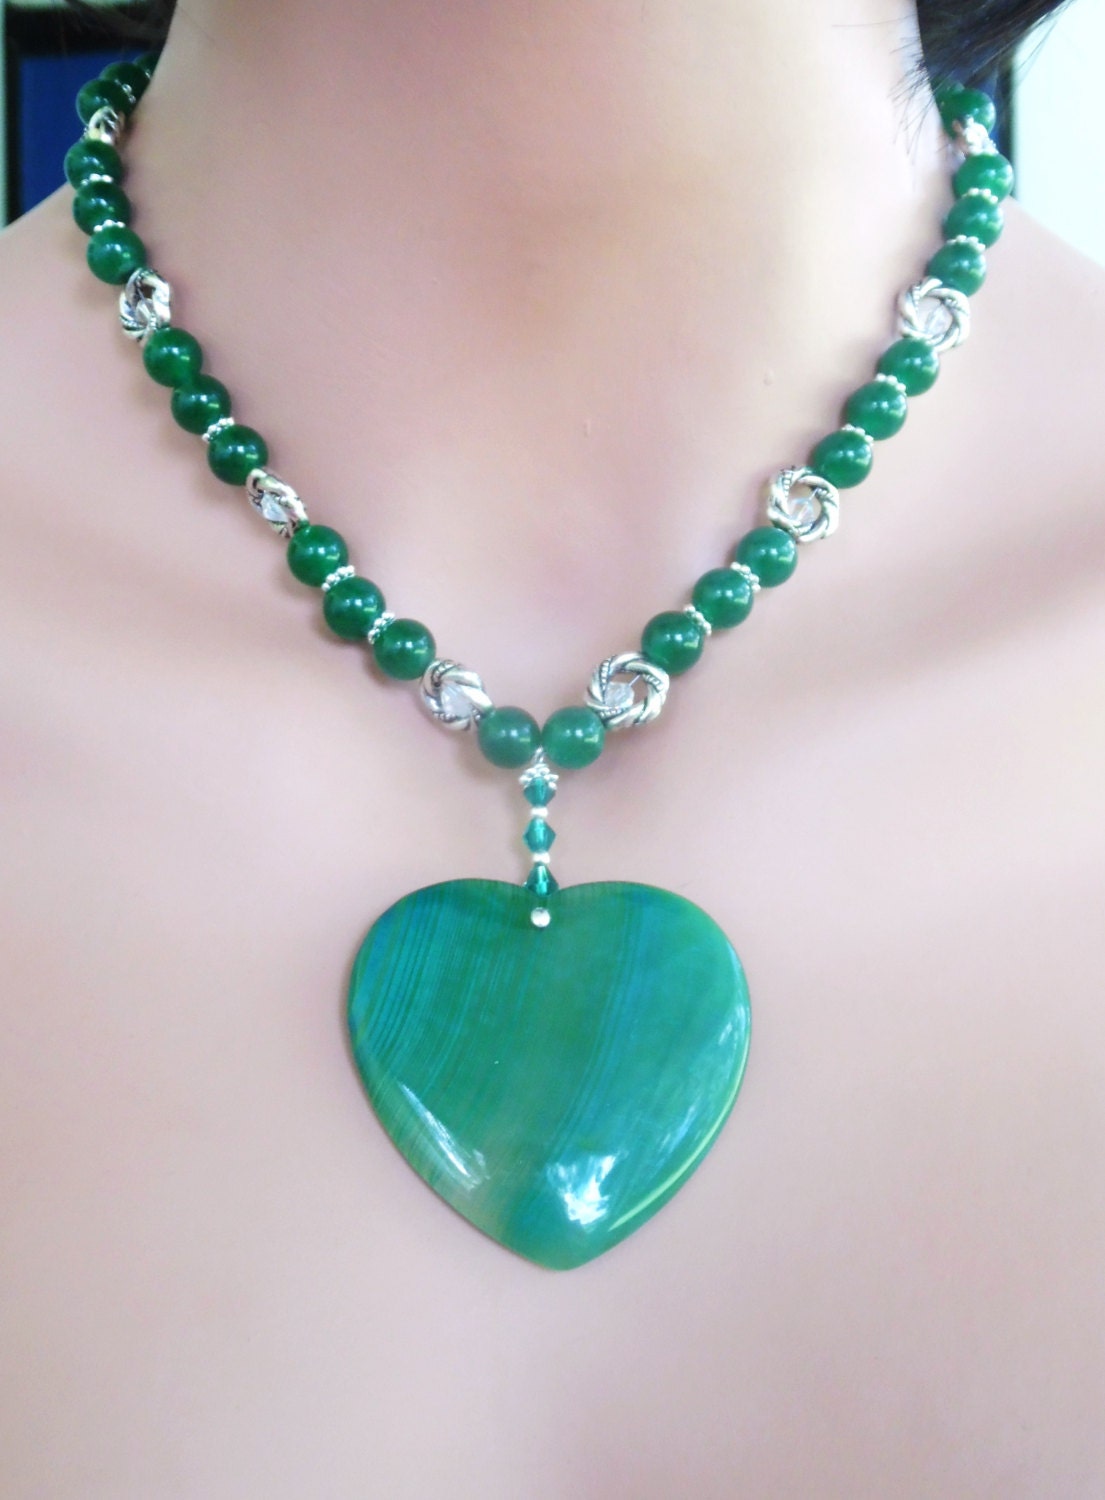 Green Agate Necklace Heart Pendant Handmade by AlsJewelryDesigns